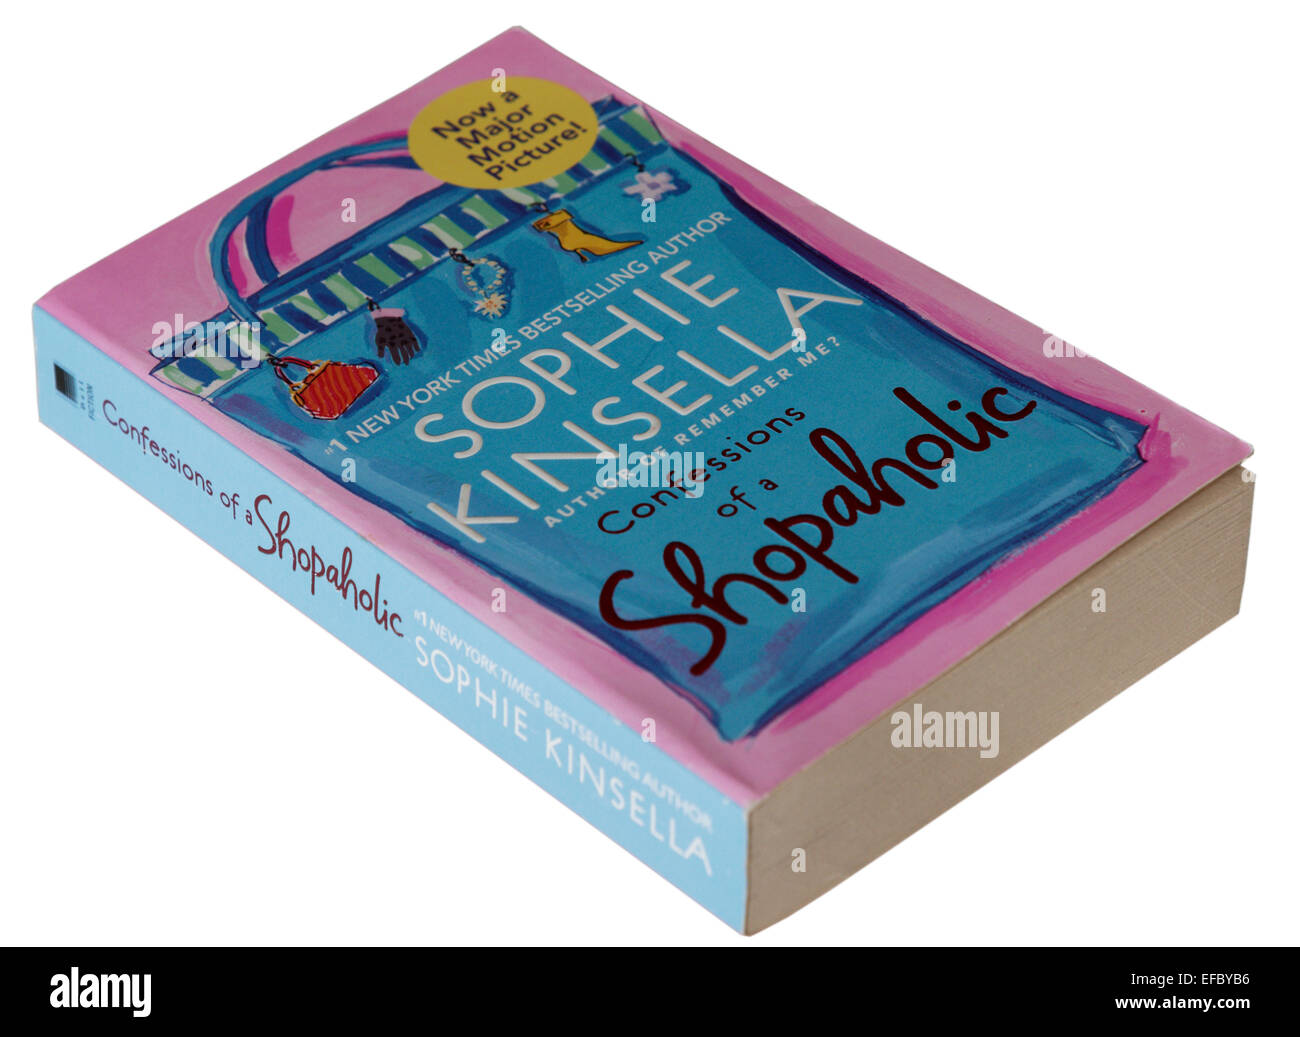 Confessions of a Shopaholic by Sophie Kinsella Stock Photo